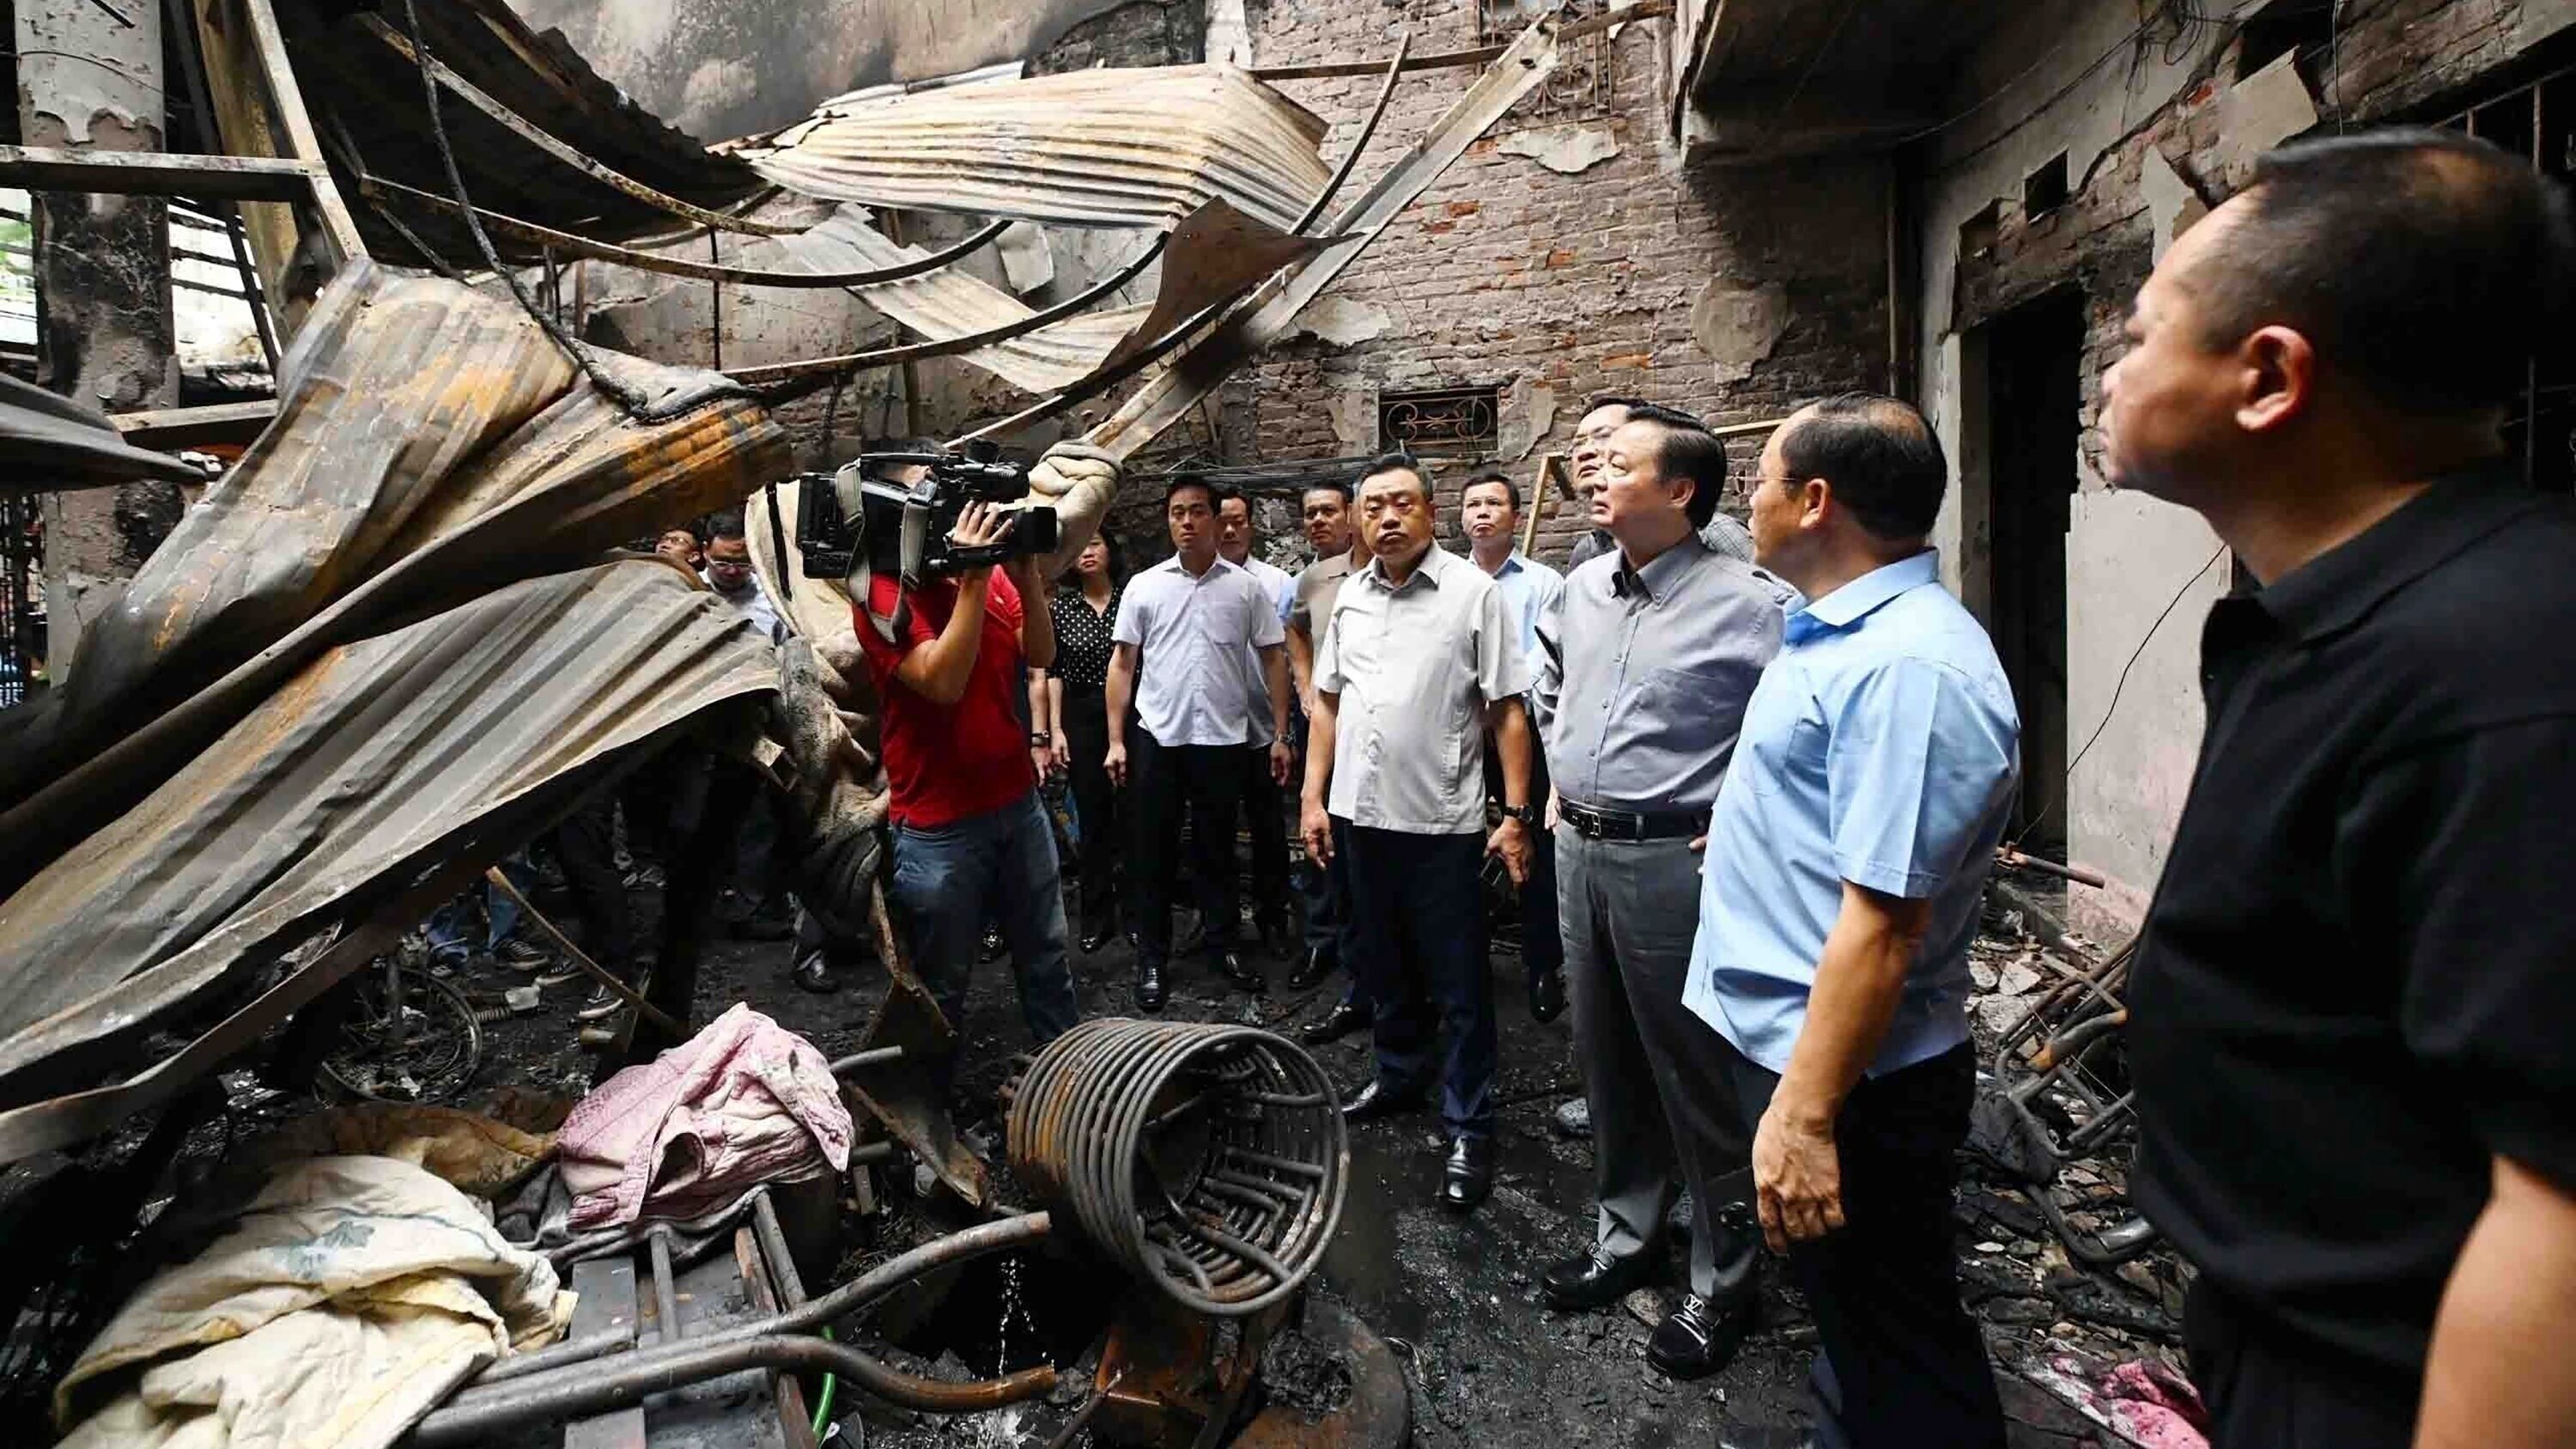 Officials visit the site of a house fire in Hanoi (Bui Van Lanh/VNA/AP)